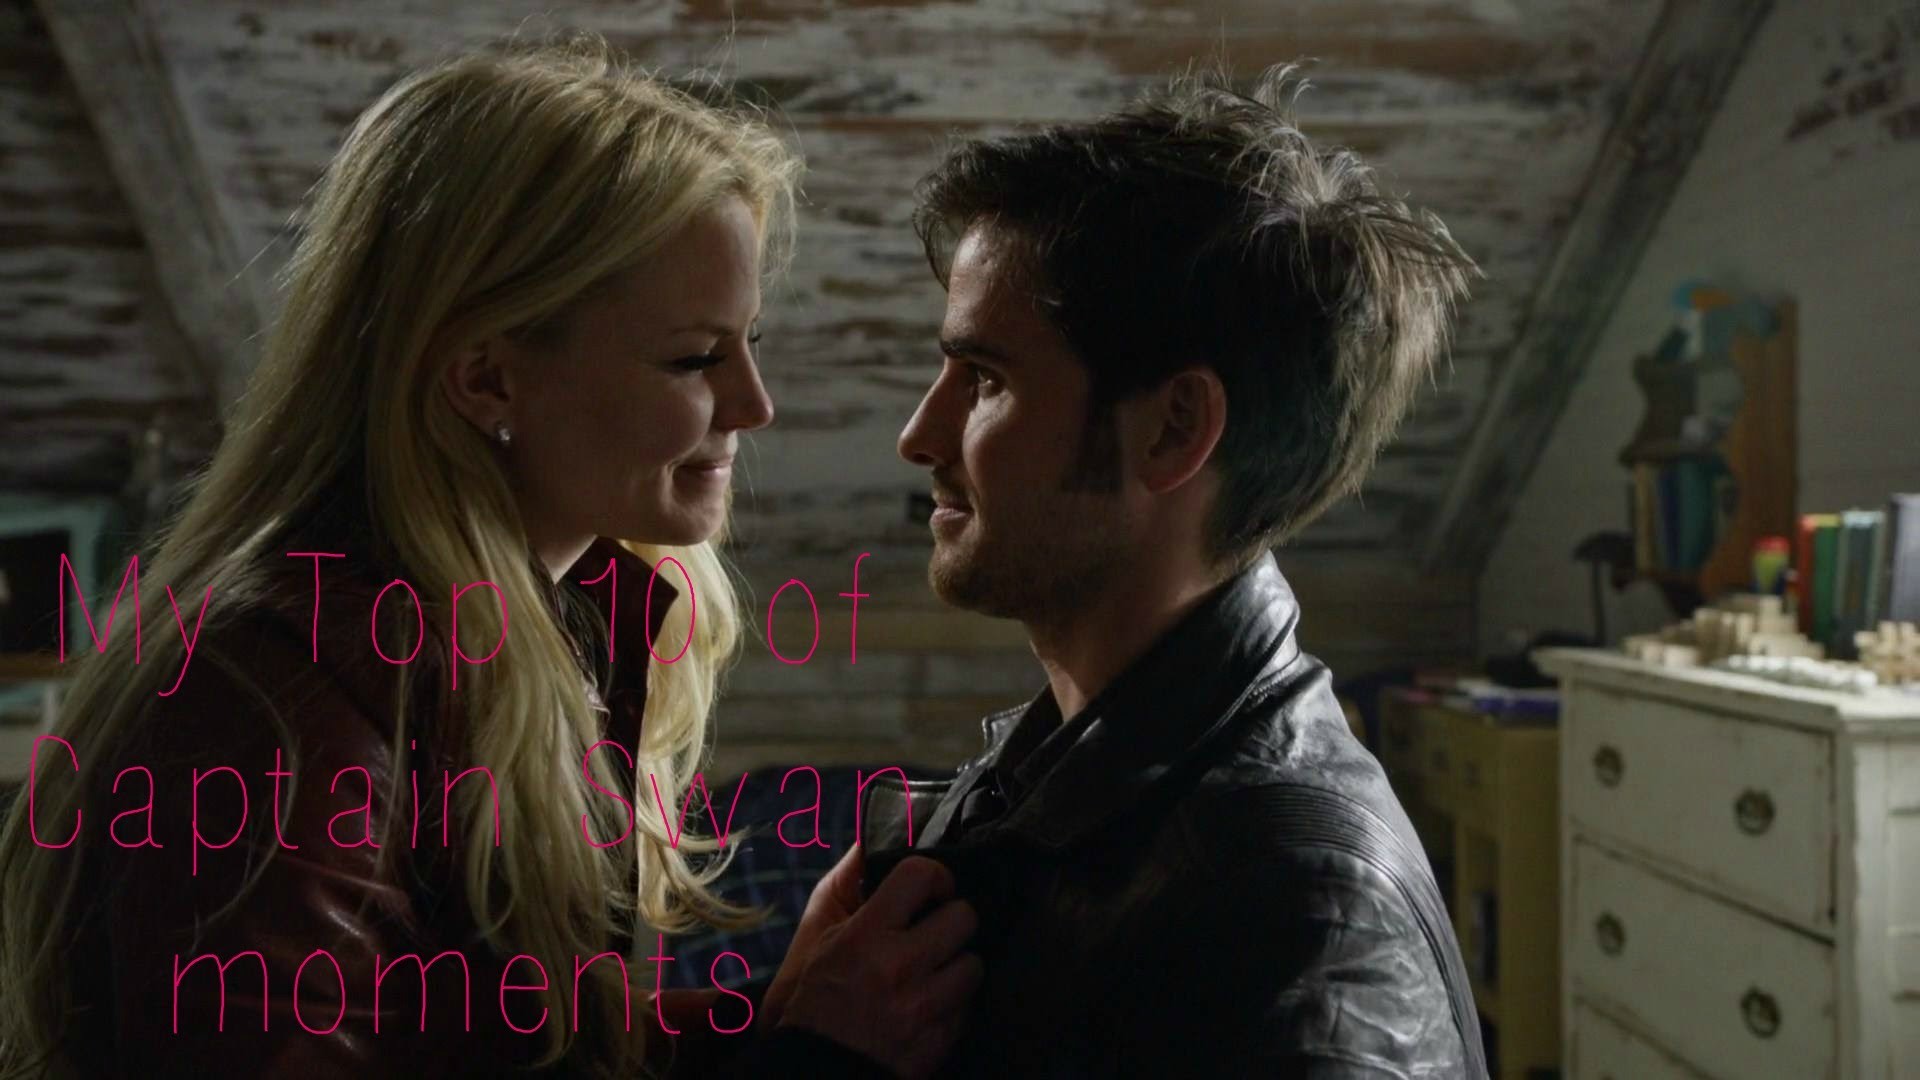 1920x1080 My top 10 of Captain Swan (Emma & Hook) moments - Once Upon A Time - YouTube